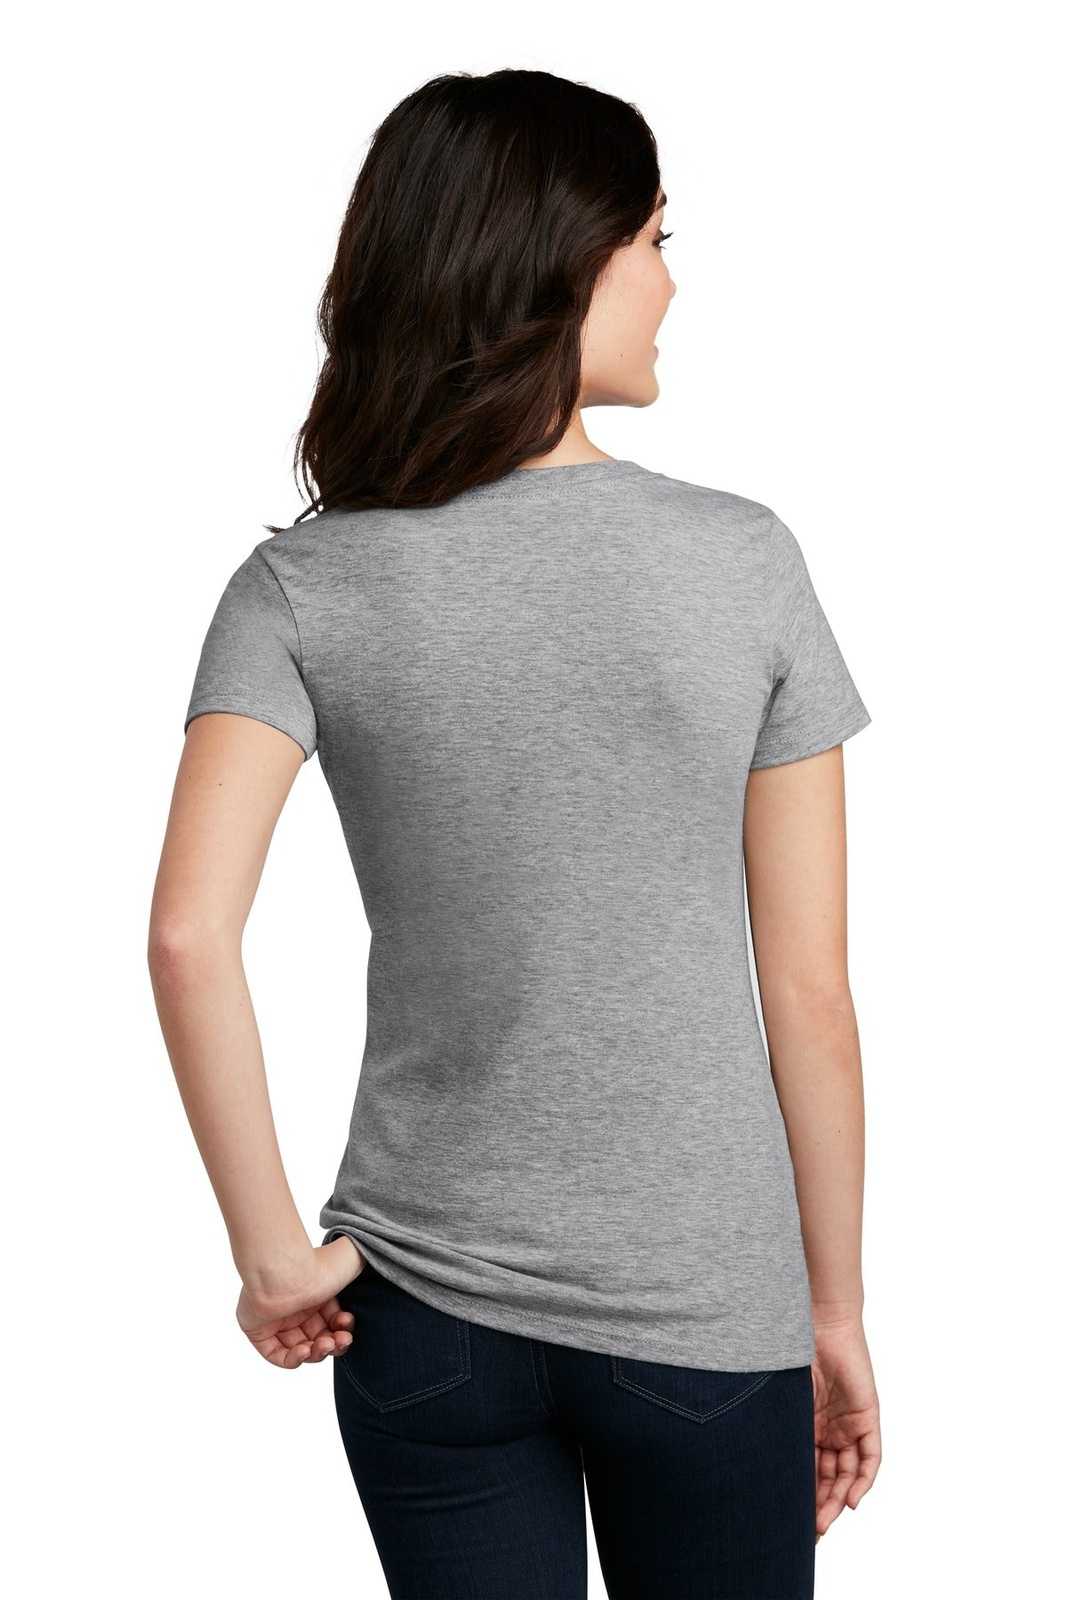 District DM1190L Women's Perfect Blend V-Neck Tee - Light Heather Gray - HIT a Double - 1